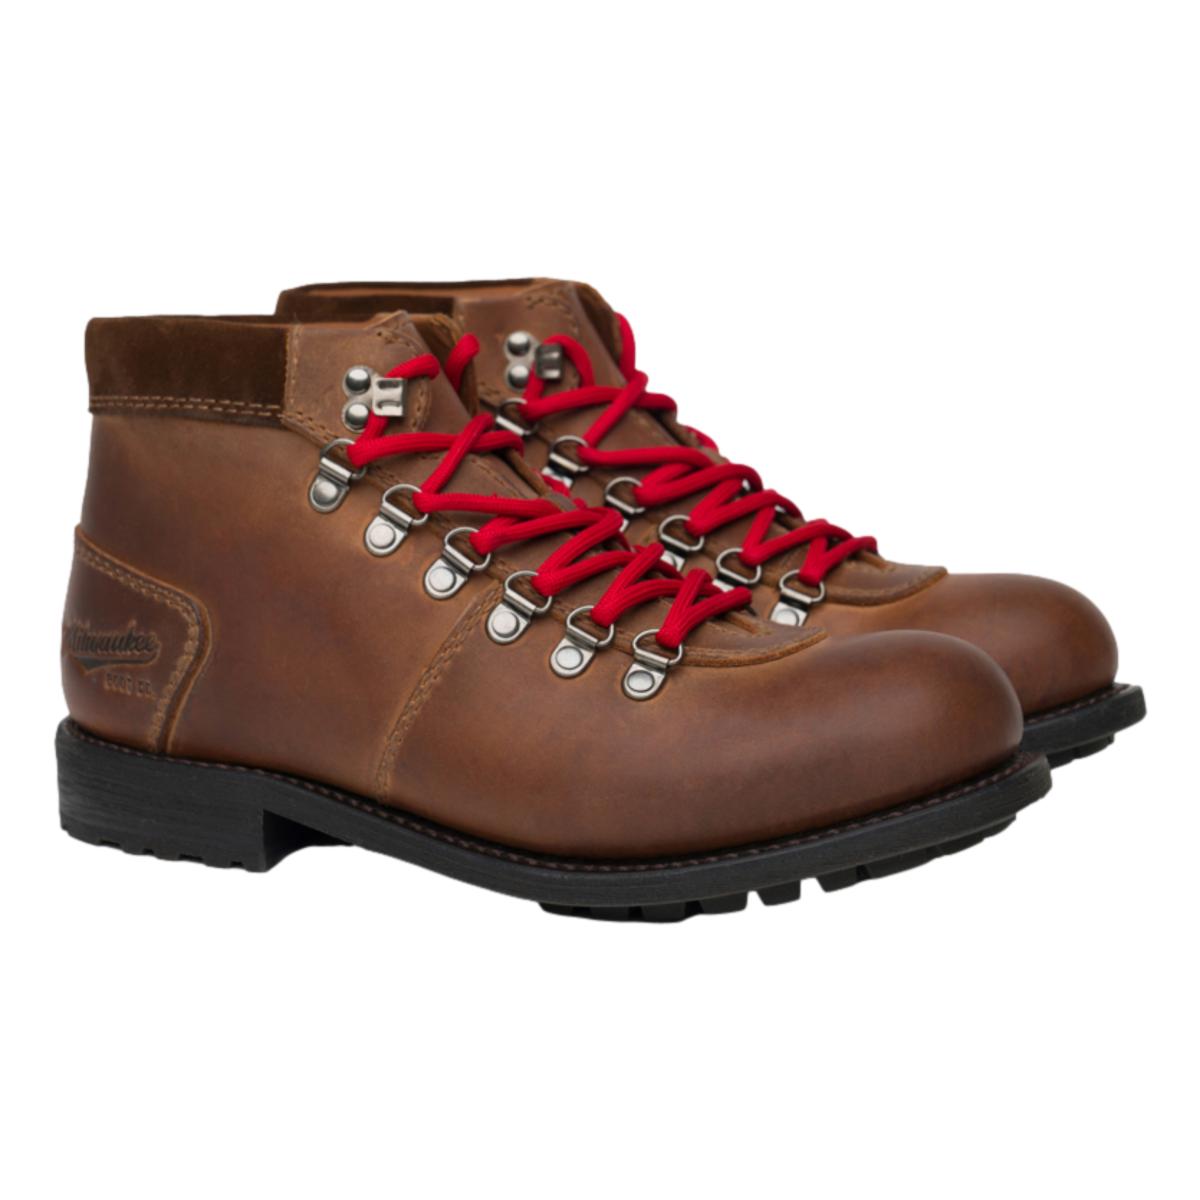 Prospect Hiking Boot Scotch - Shoes/Boots